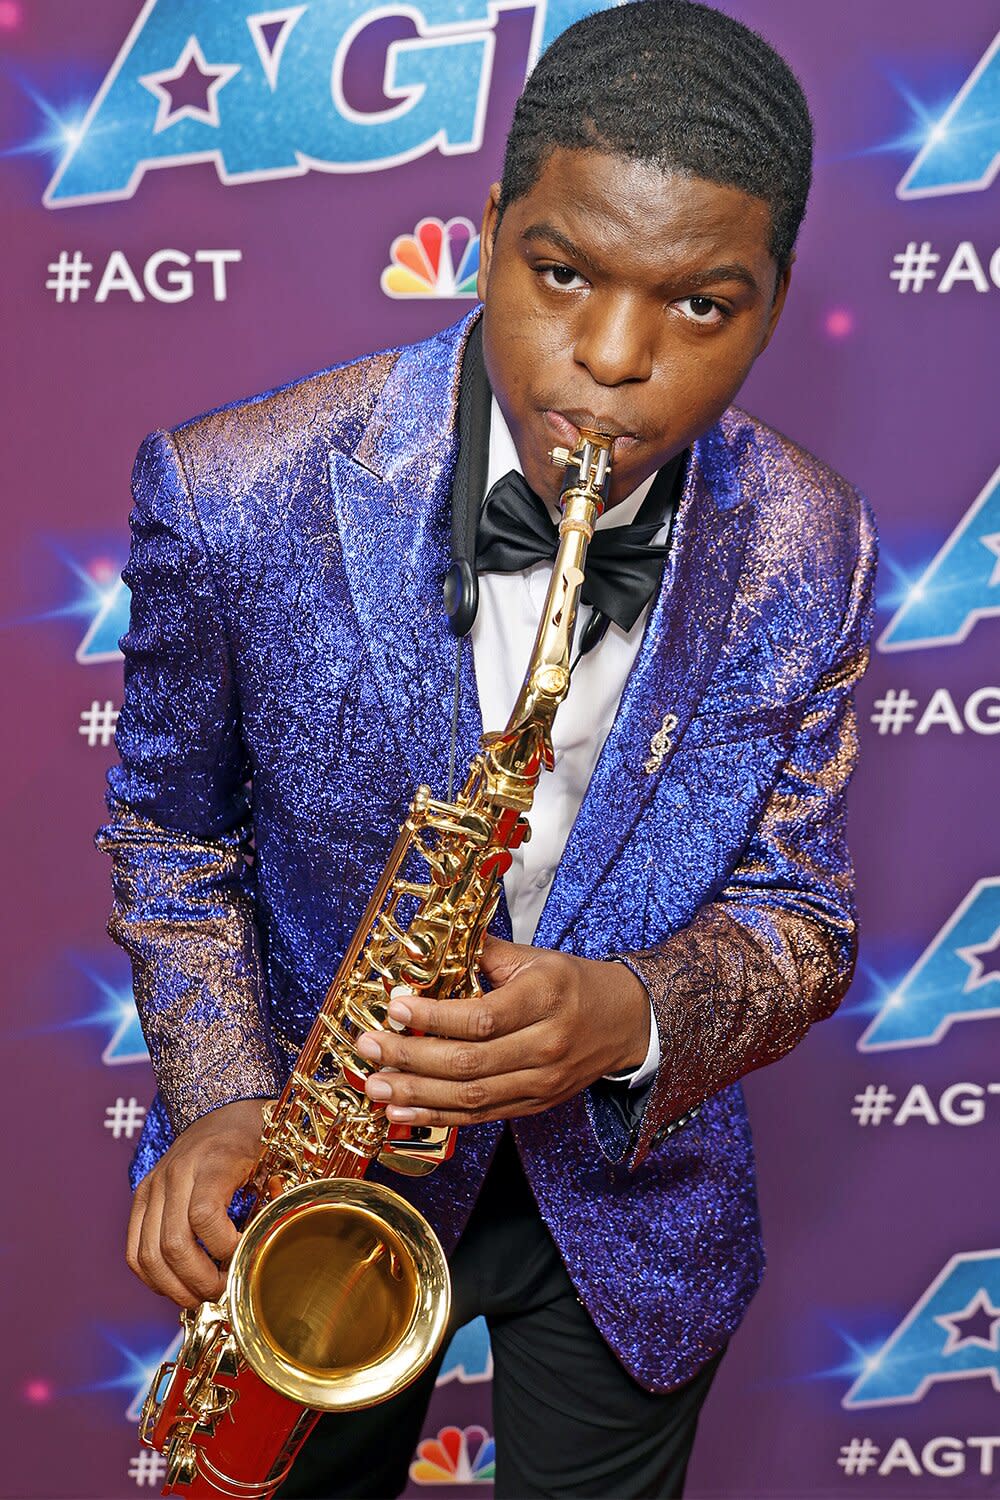 PASADENA, CALIFORNIA - AUGUST 09: Avery Dixon is seen at the red carpet for "America's Got Talent" Season 17 Live Show at Sheraton Pasadena Hotel on August 09, 2022 in Pasadena, California. (Photo by Frazer Harrison/Getty Images)